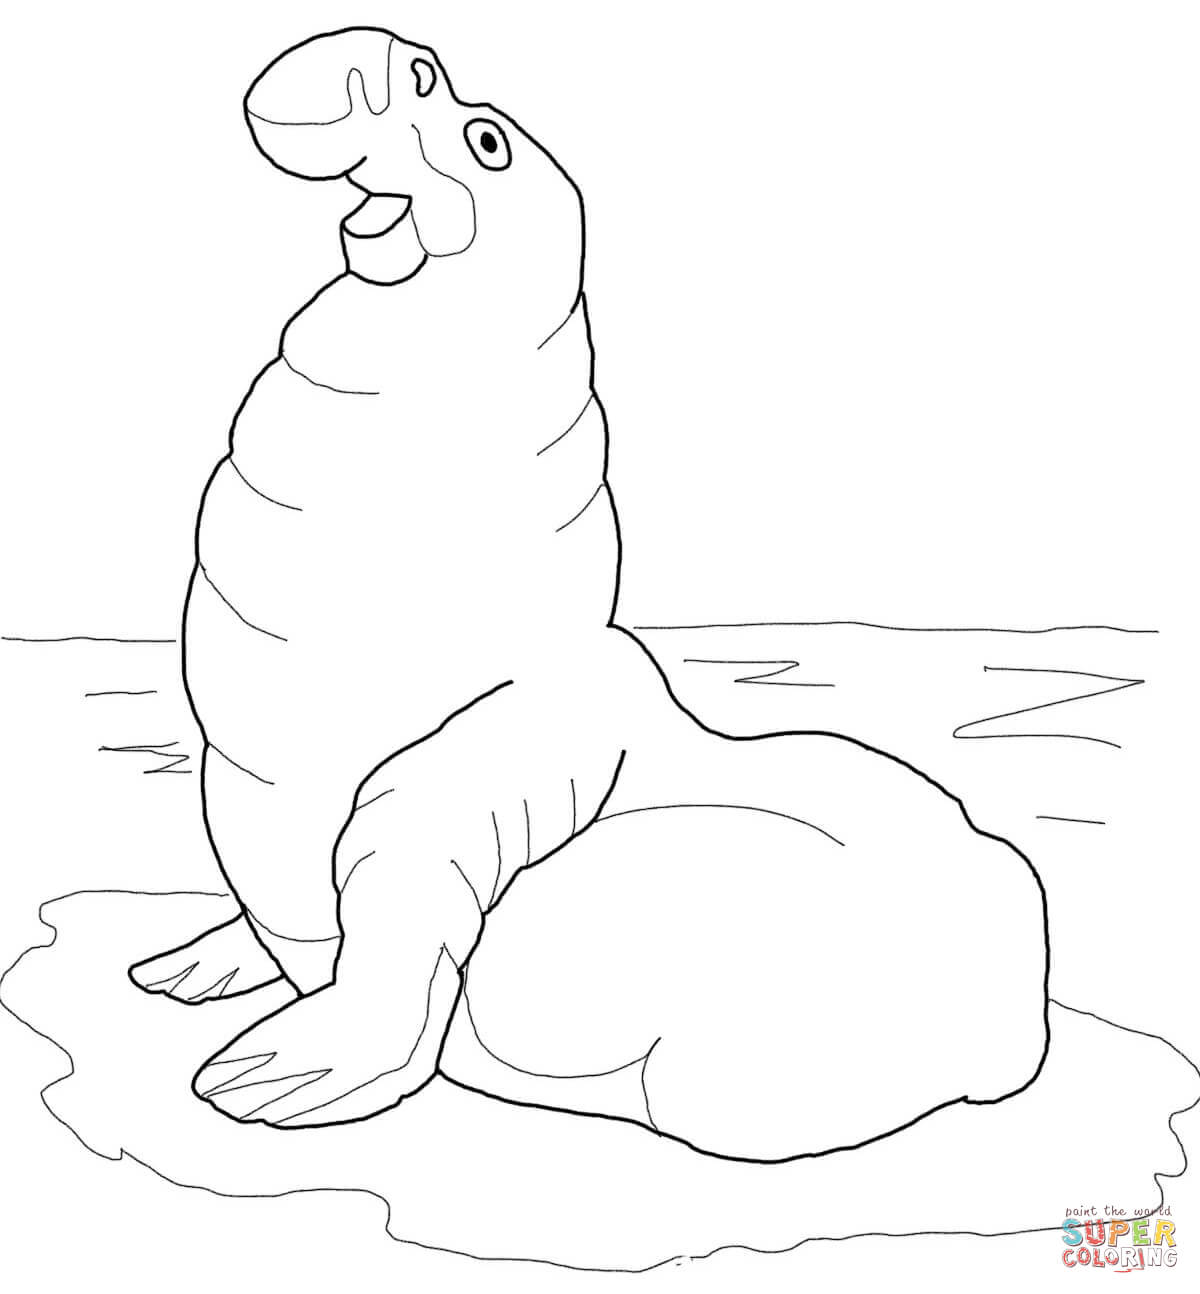 Elephant seal or sea elephant coloring page free printable coloring pages